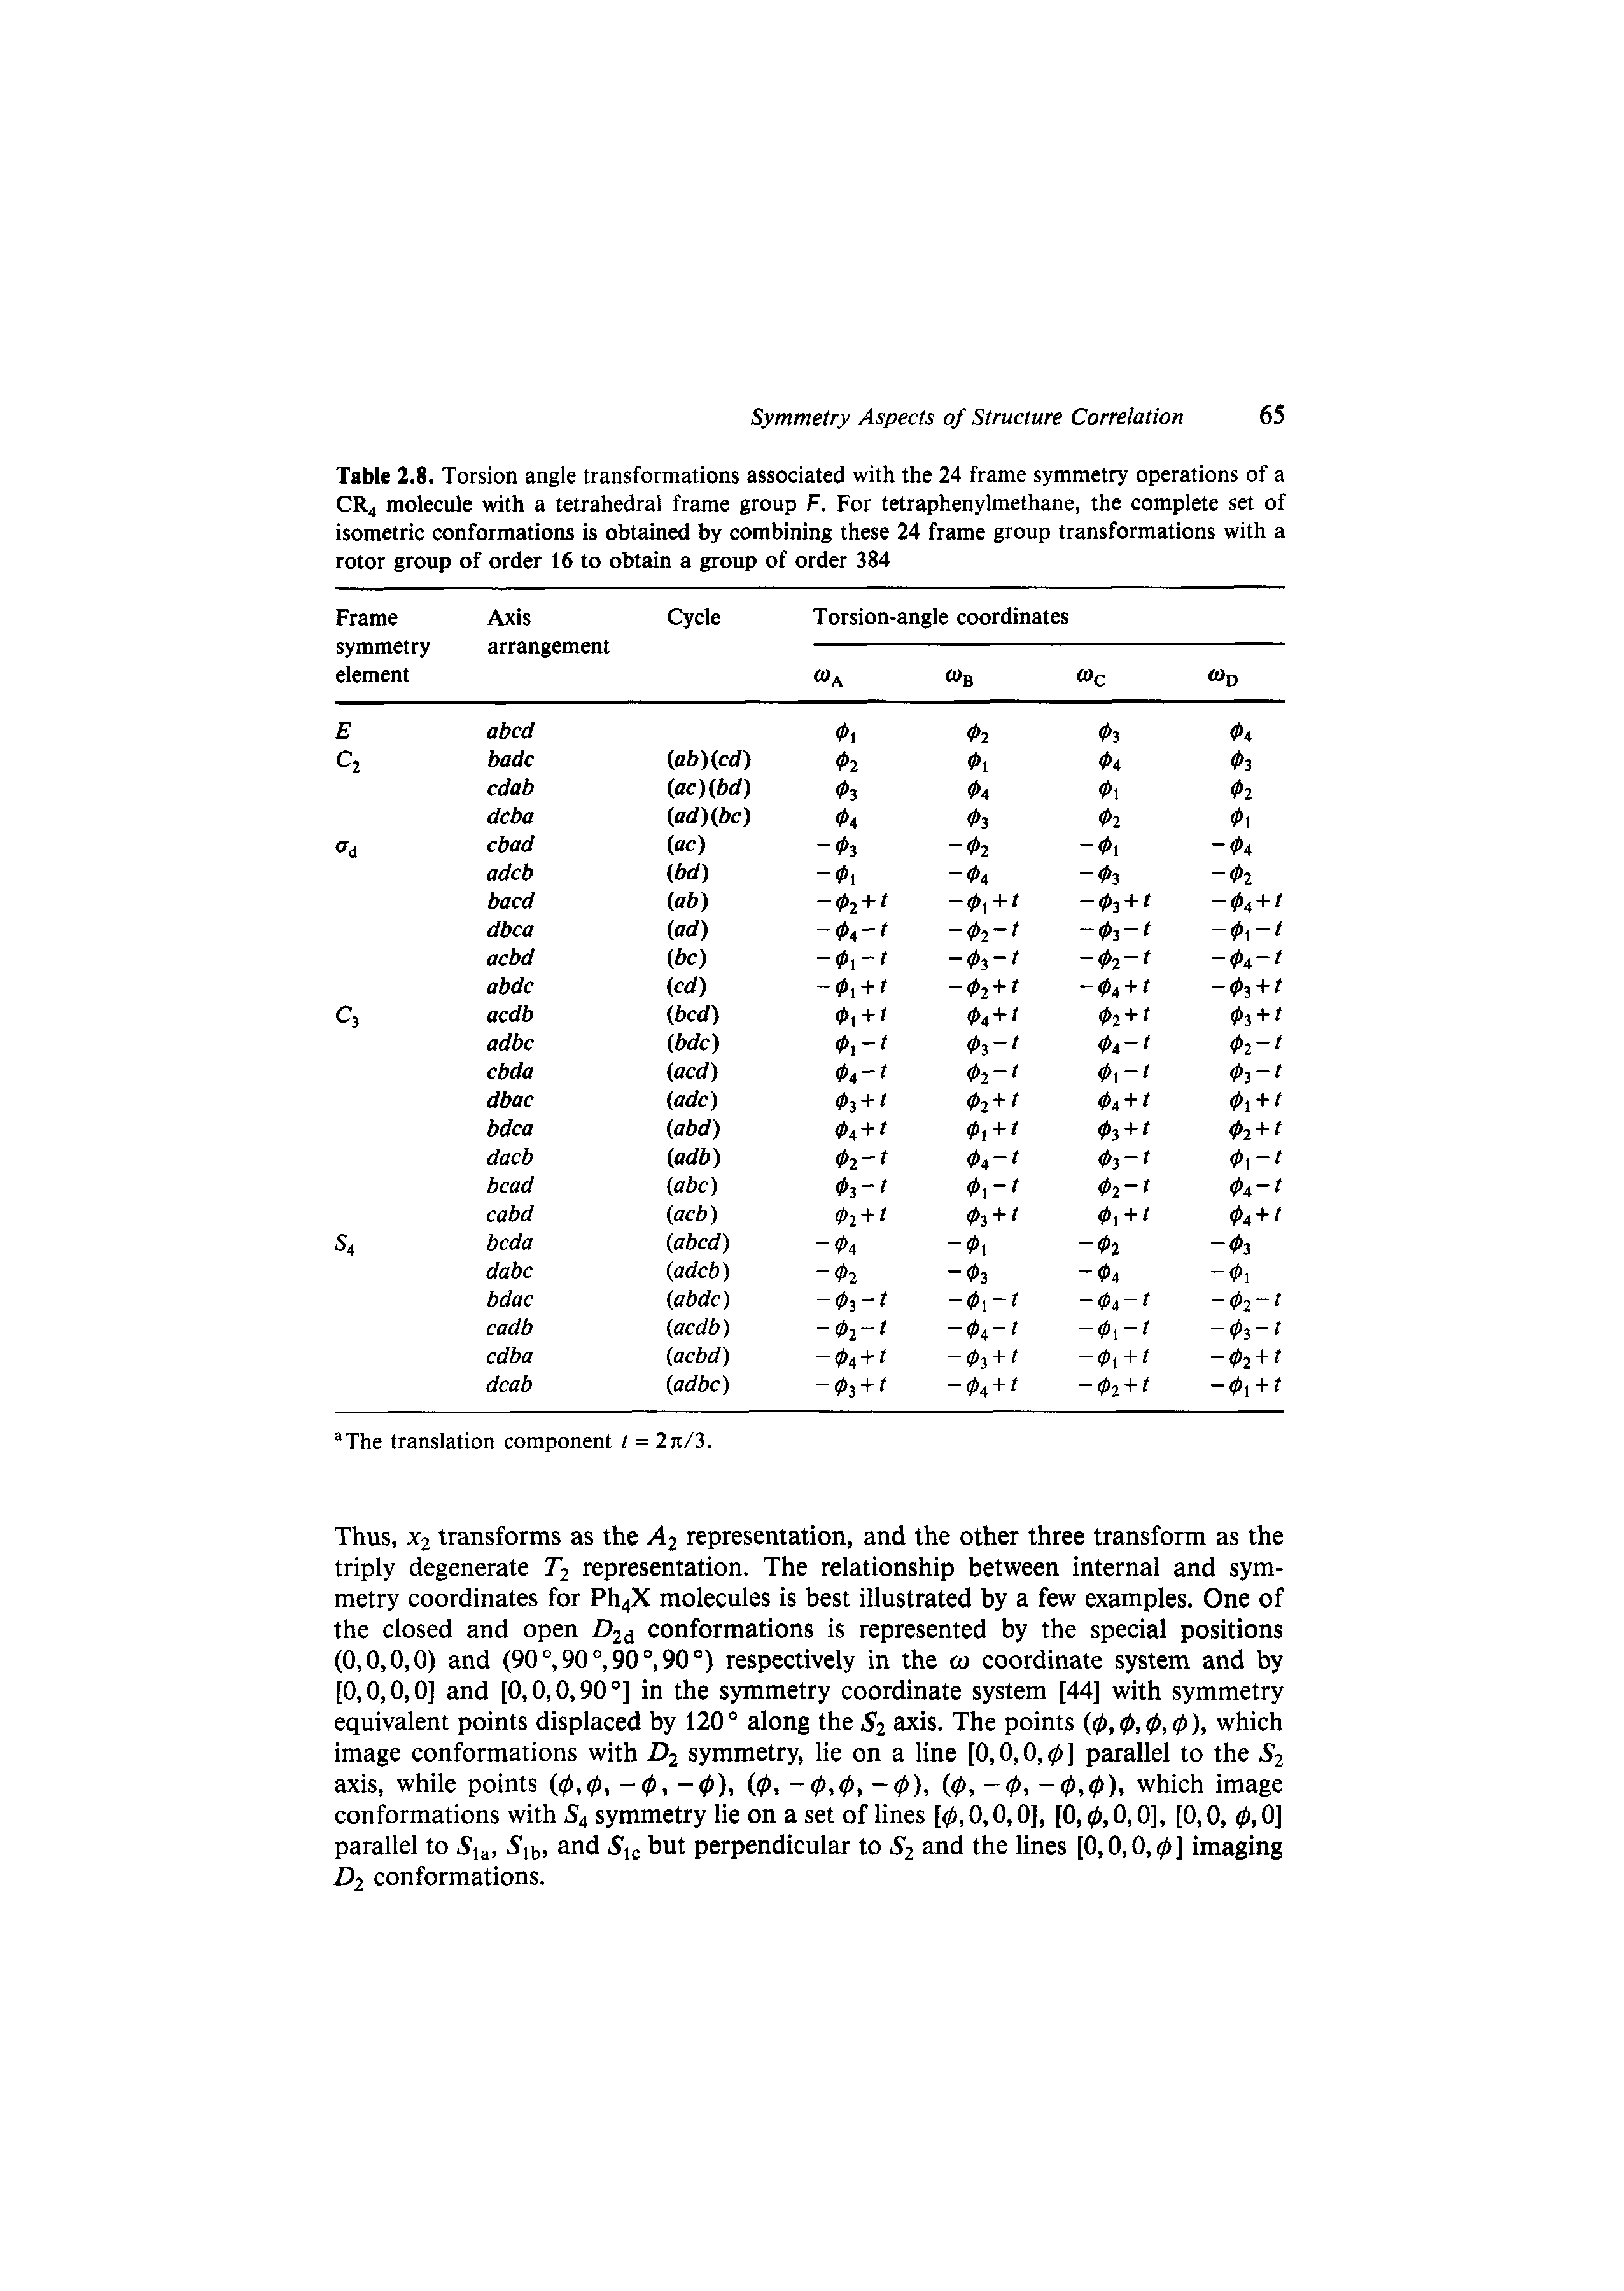 Table 2.8. Torsion angle transformations associated with the 24 frame symmetry operations of a CR4 molecule with a tetrahedral frame group F. For tetraphenylmethane, the complete set of isometric conformations is obtained by combining these 24 frame group transformations with a rotor group of order 16 to obtain a group of order 384...